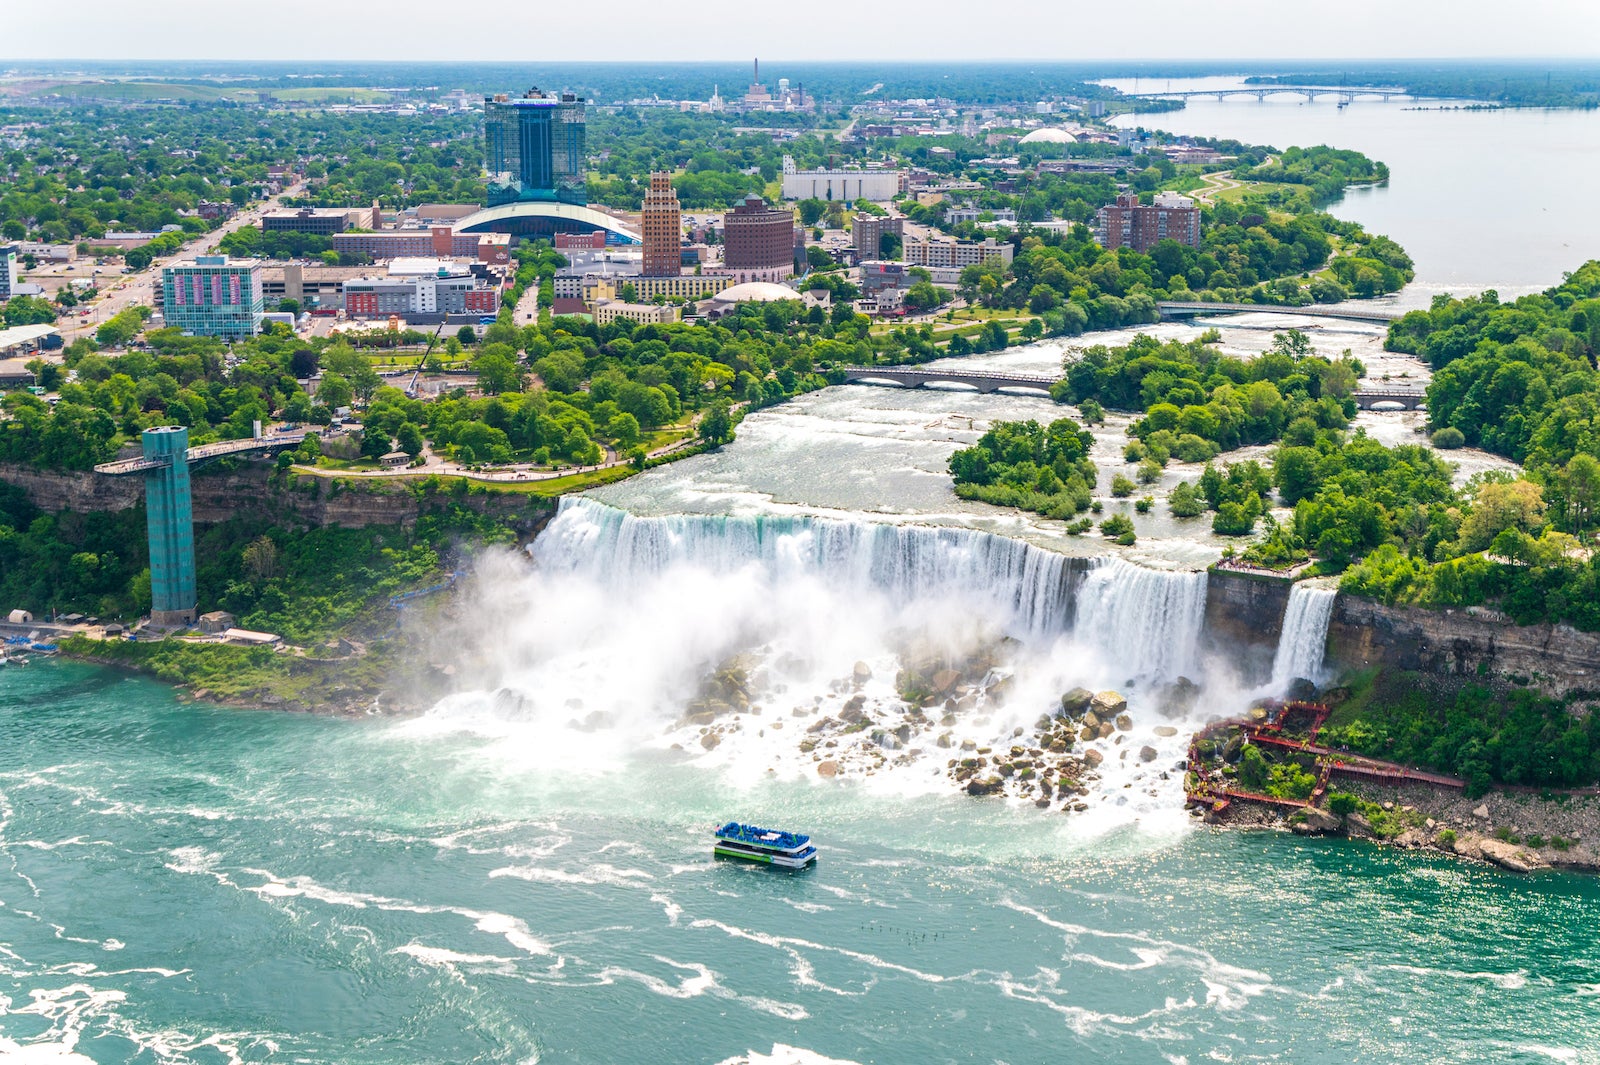 High angle view of a tourboat in the American and Bridal Veil waterfalls in Niagara falls